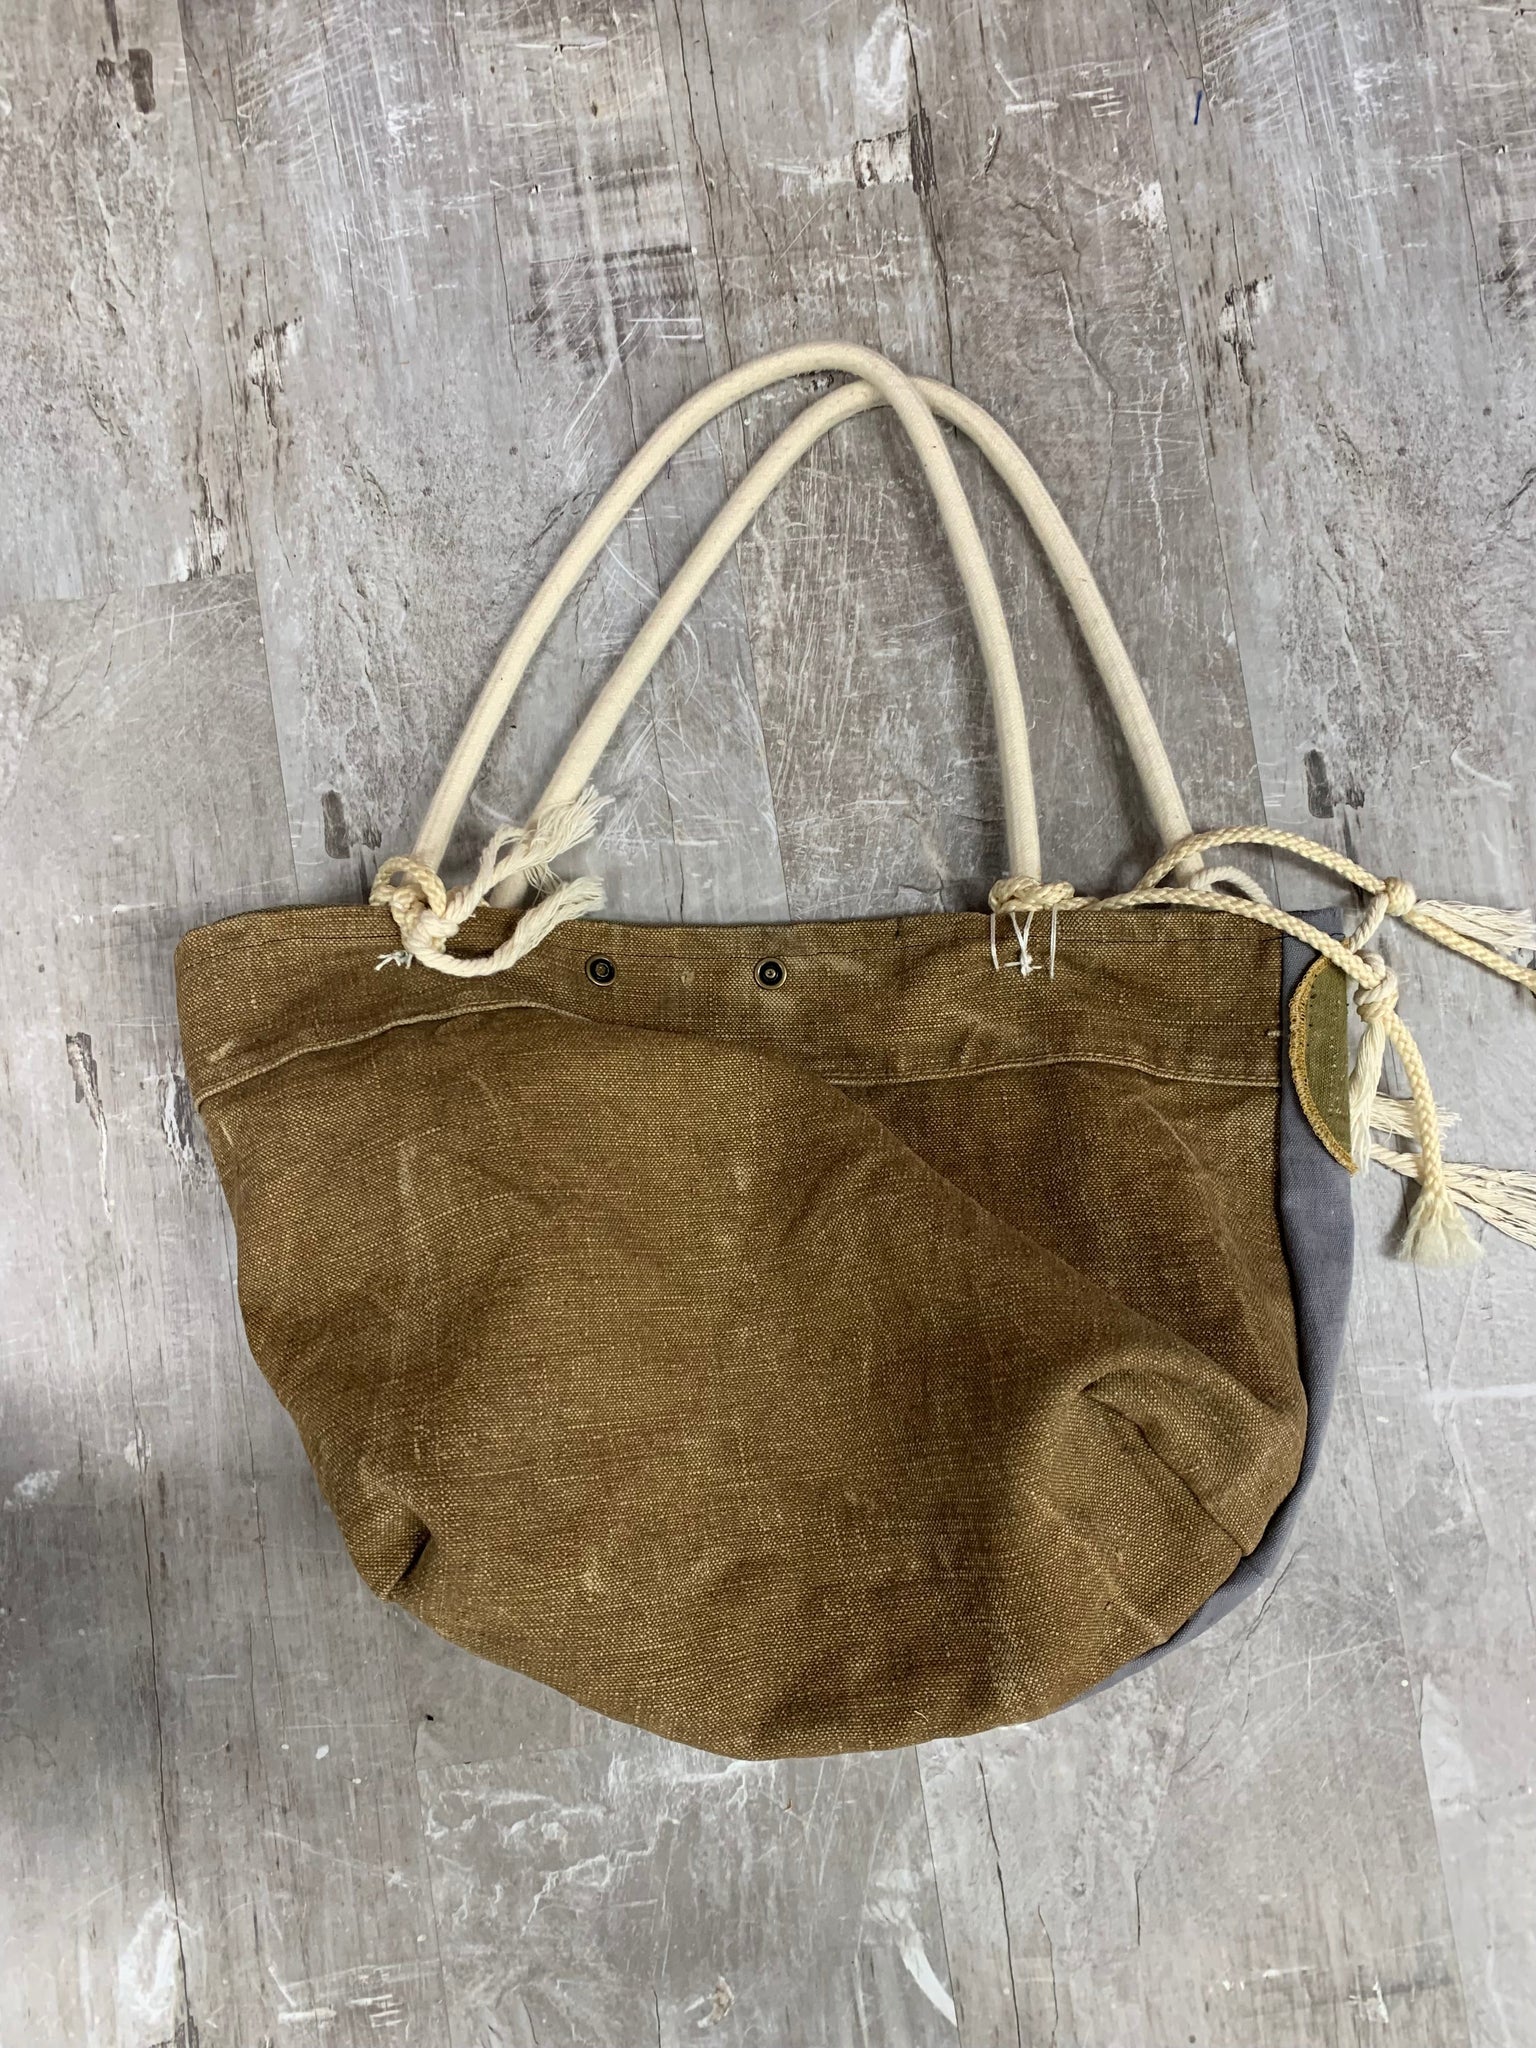 Army Canvas Tote Bag